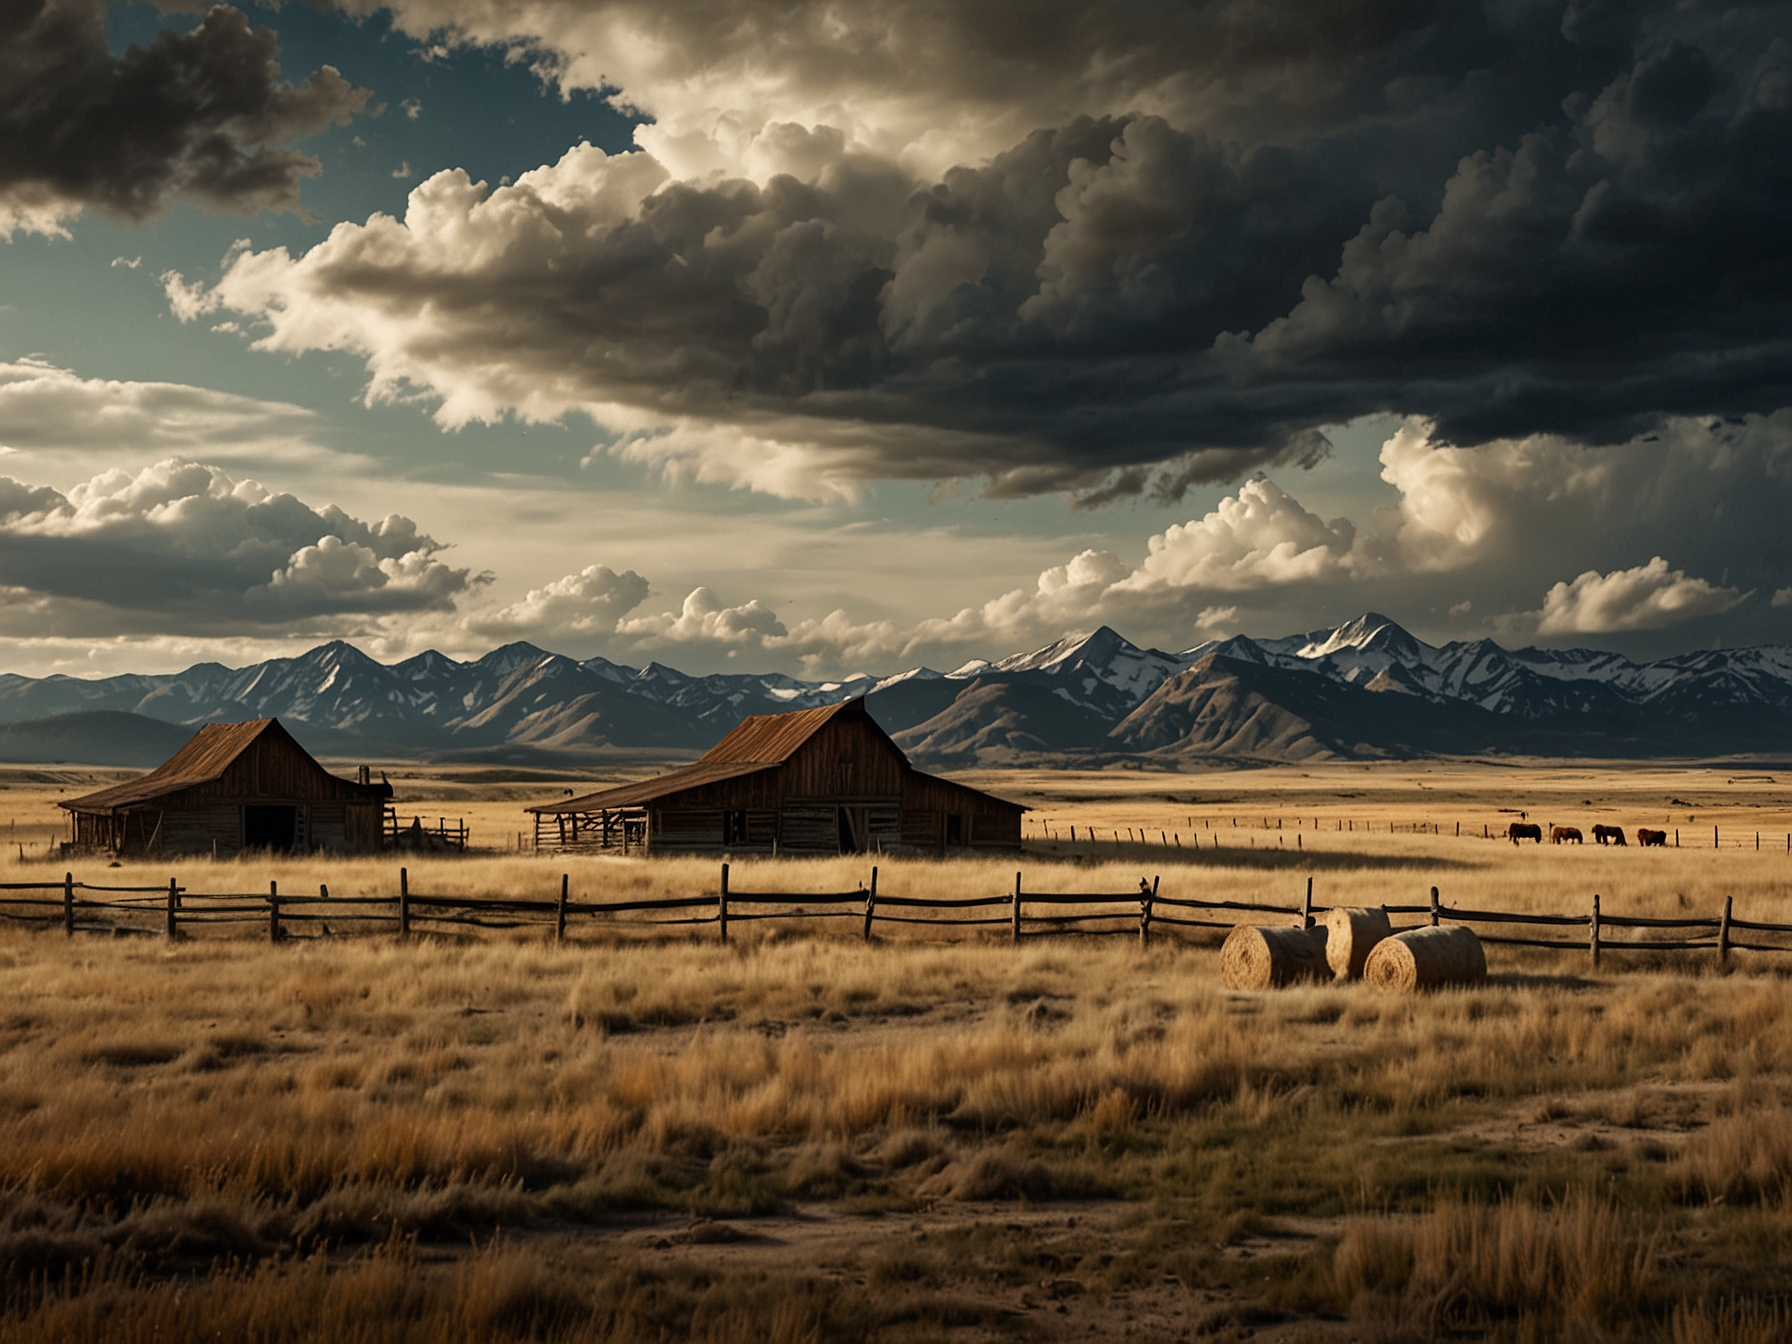 A picturesque scene of the Dutton family ranch in Montana, capturing the majestic landscape and dramatic skies that have become synonymous with 'Yellowstone'.